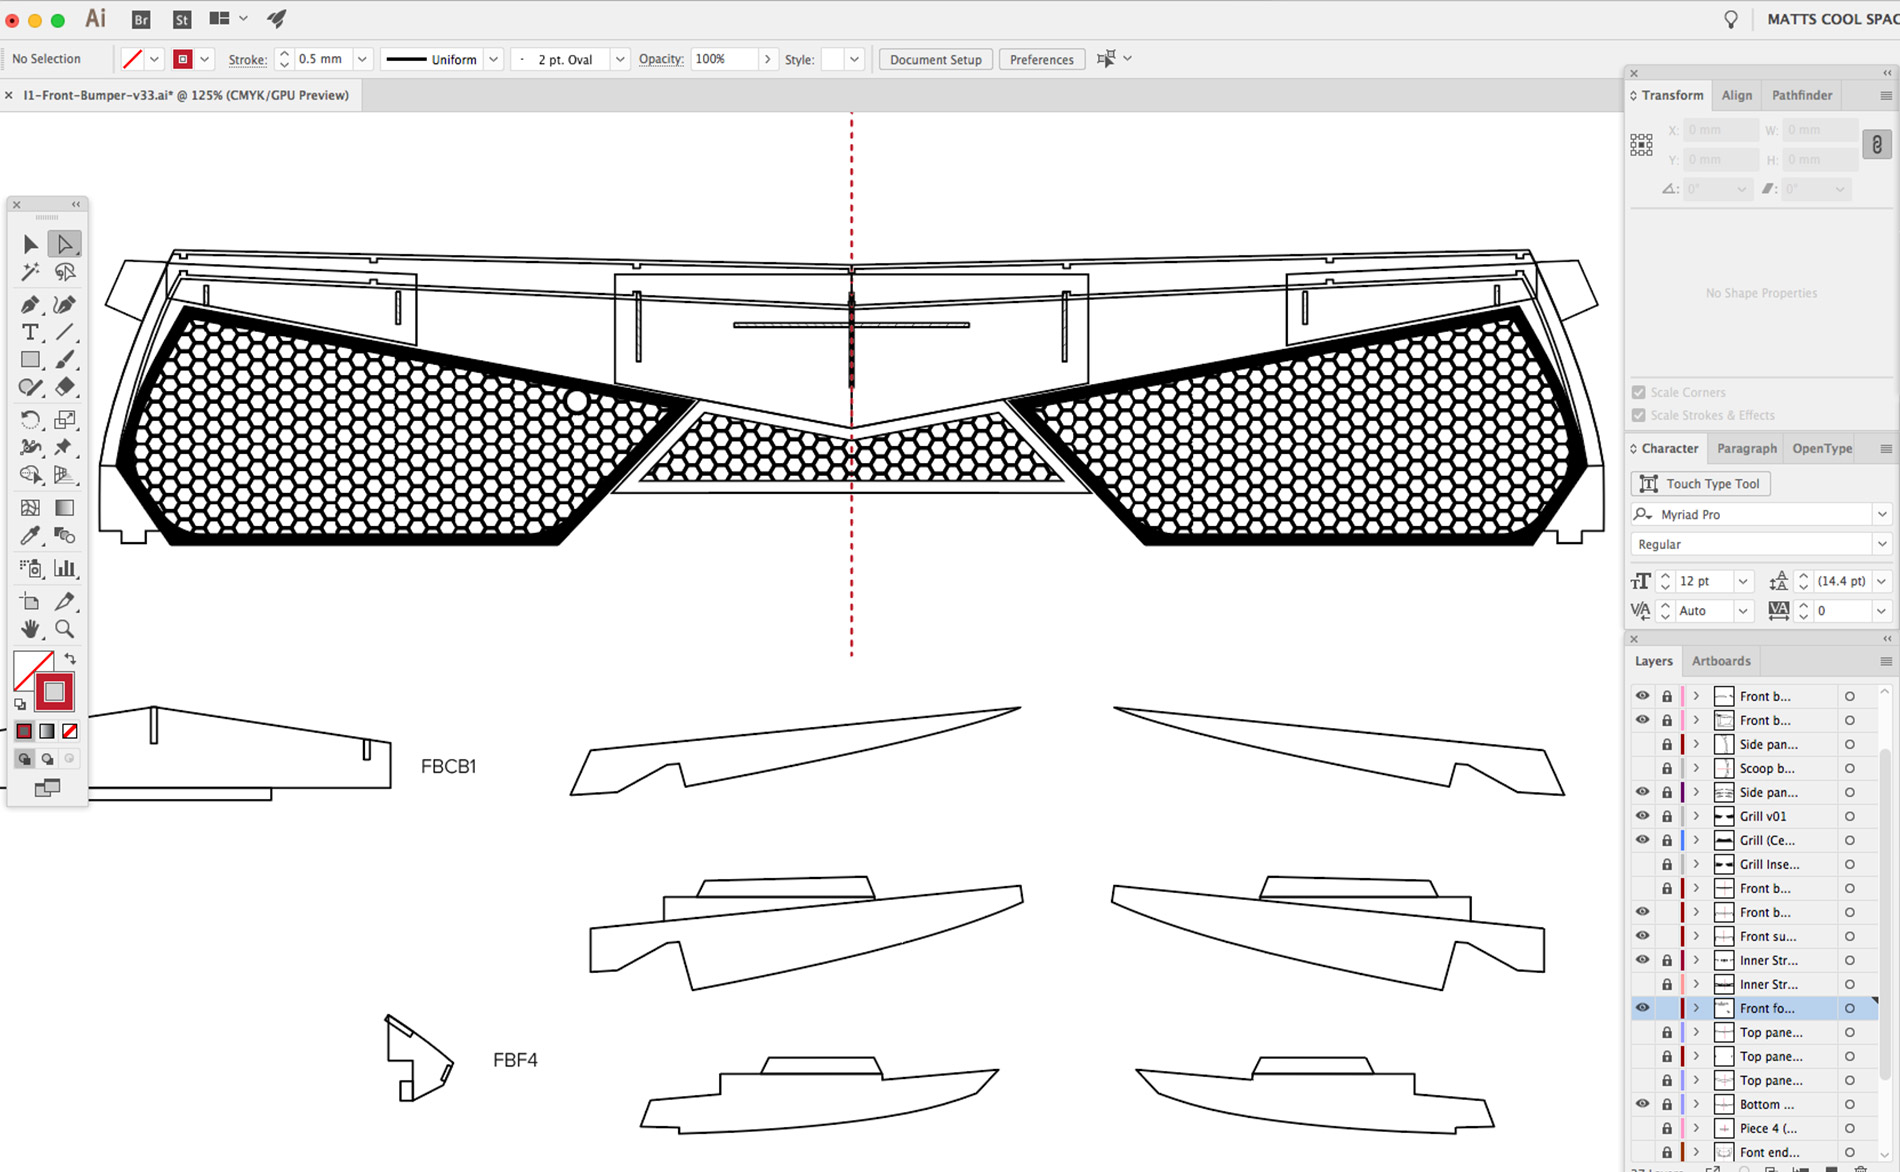 Screenshot from my Illustrator file, showing the front bumper grill inserts, and some bumper parts.